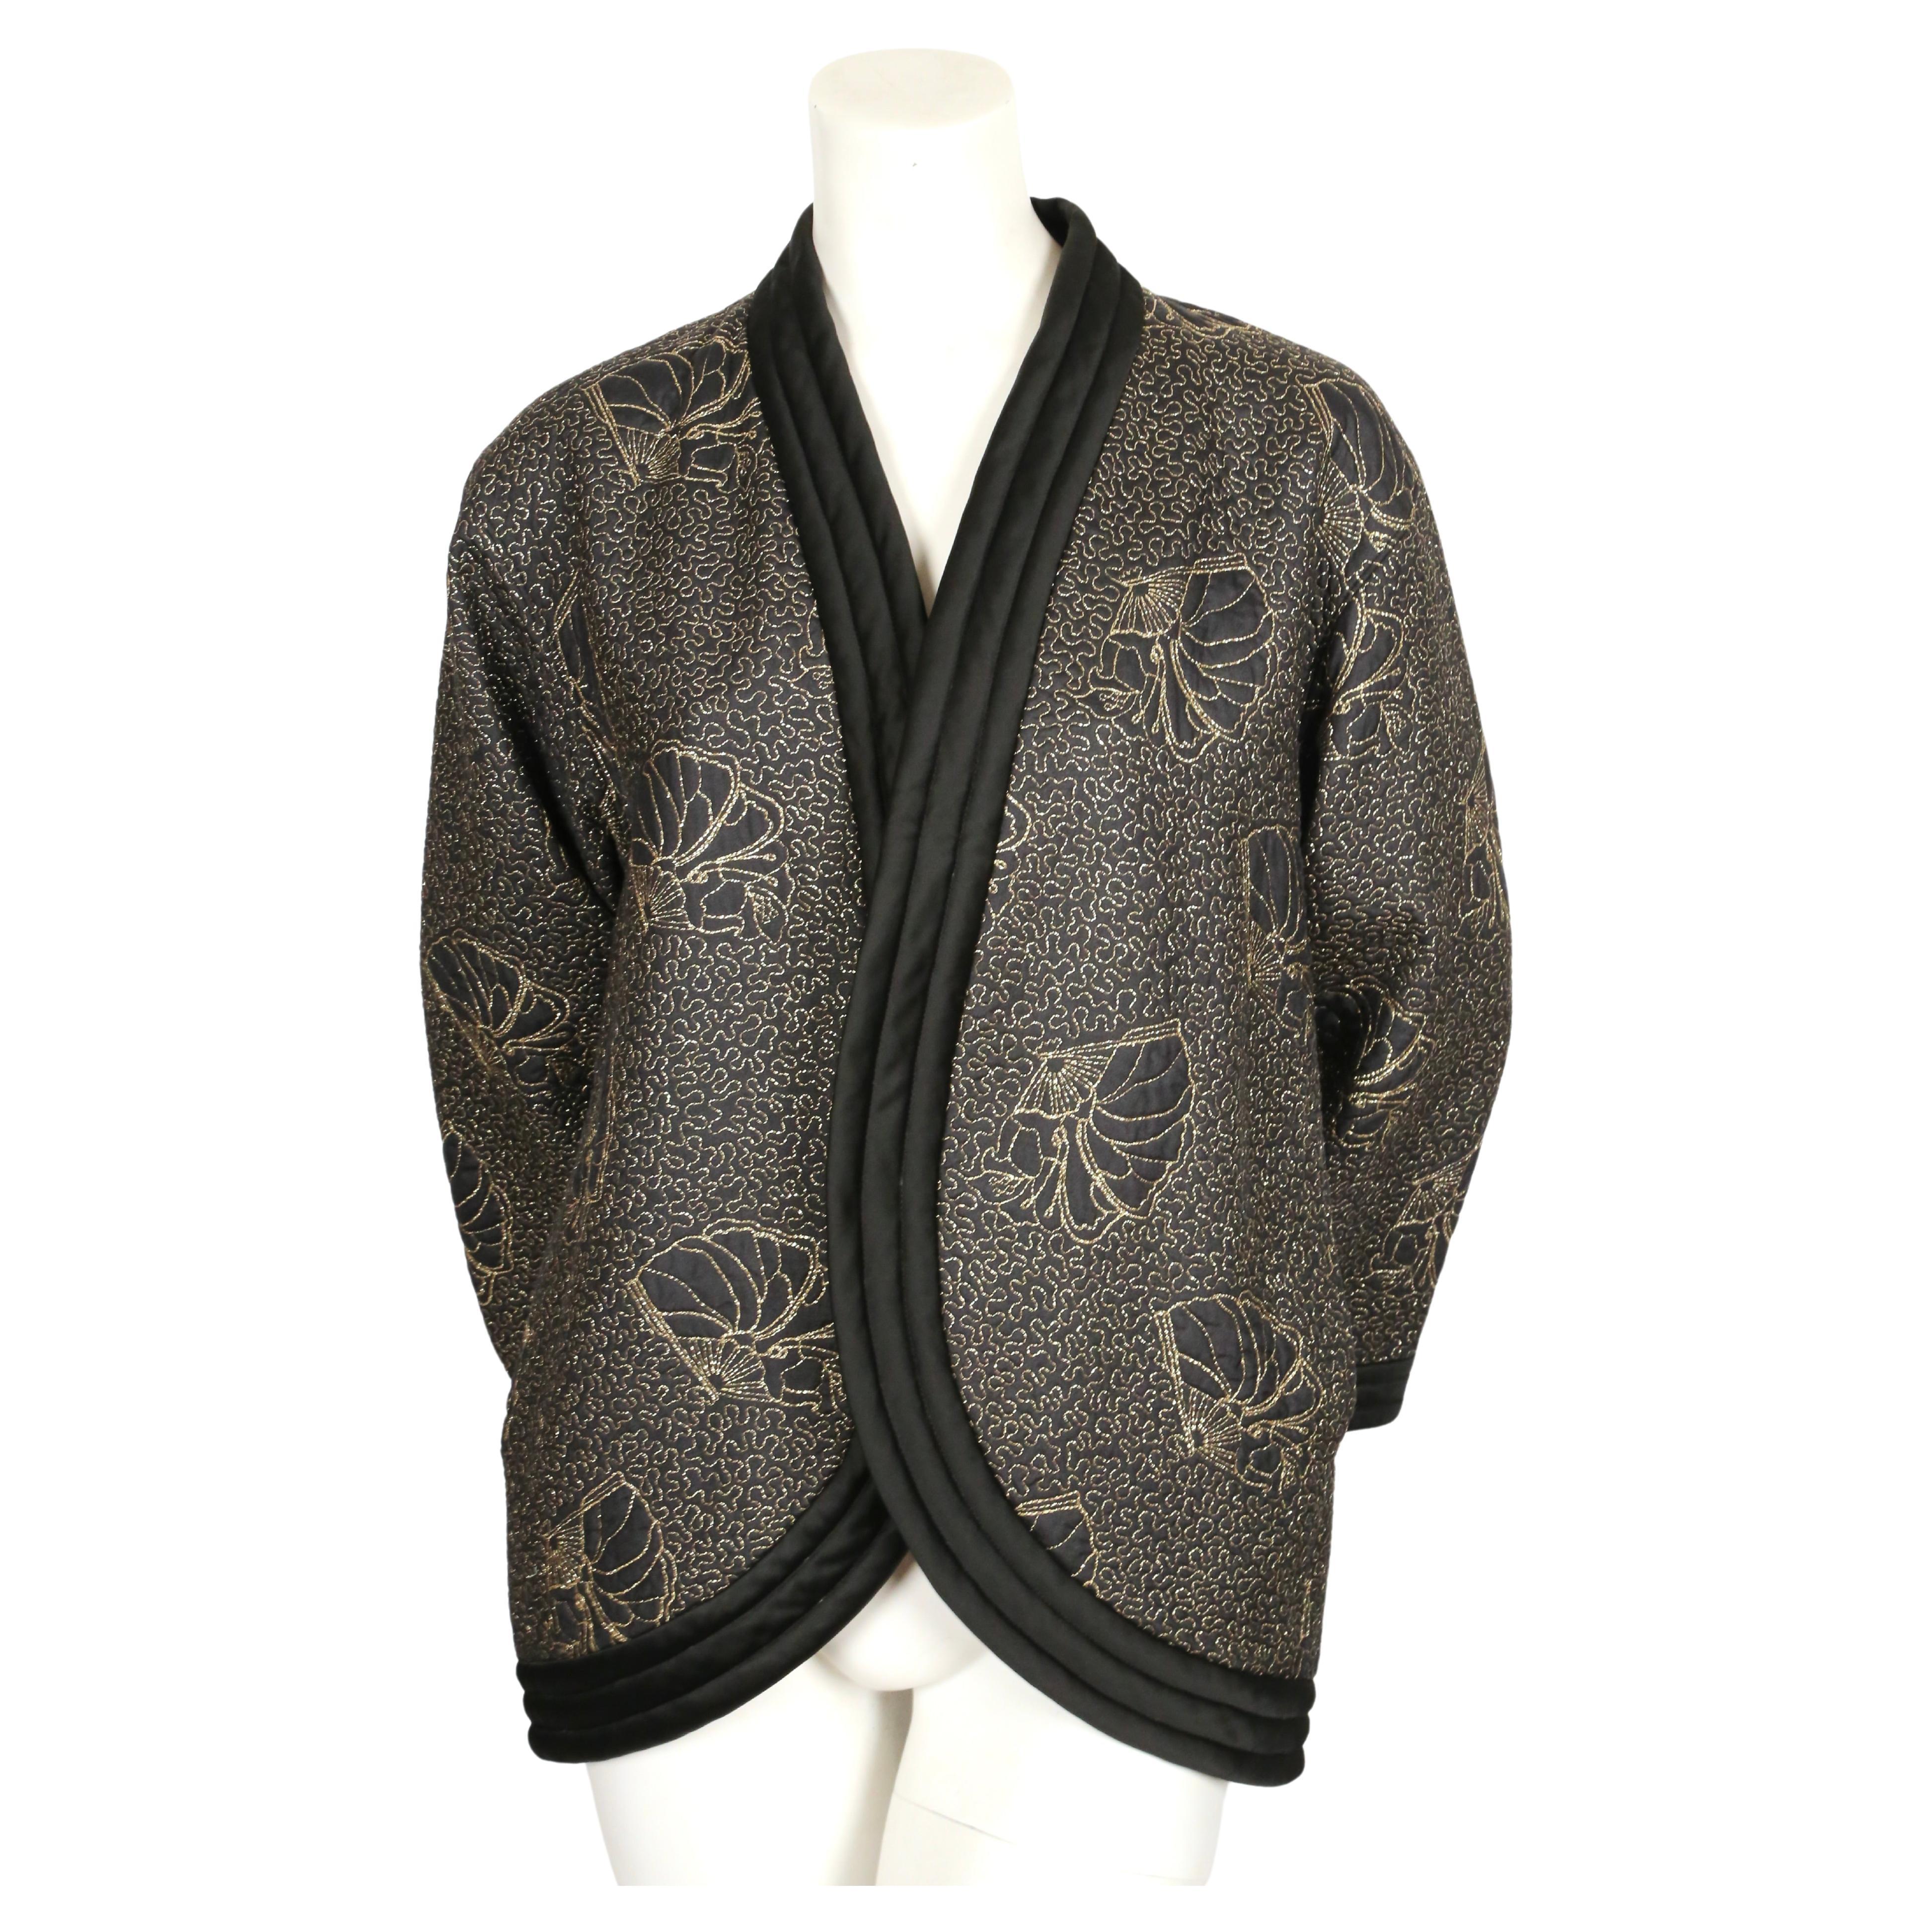 1979 YVES SAINT LAURENT black satin kimono jacket with gold seashell embroidery In Excellent Condition For Sale In San Fransisco, CA